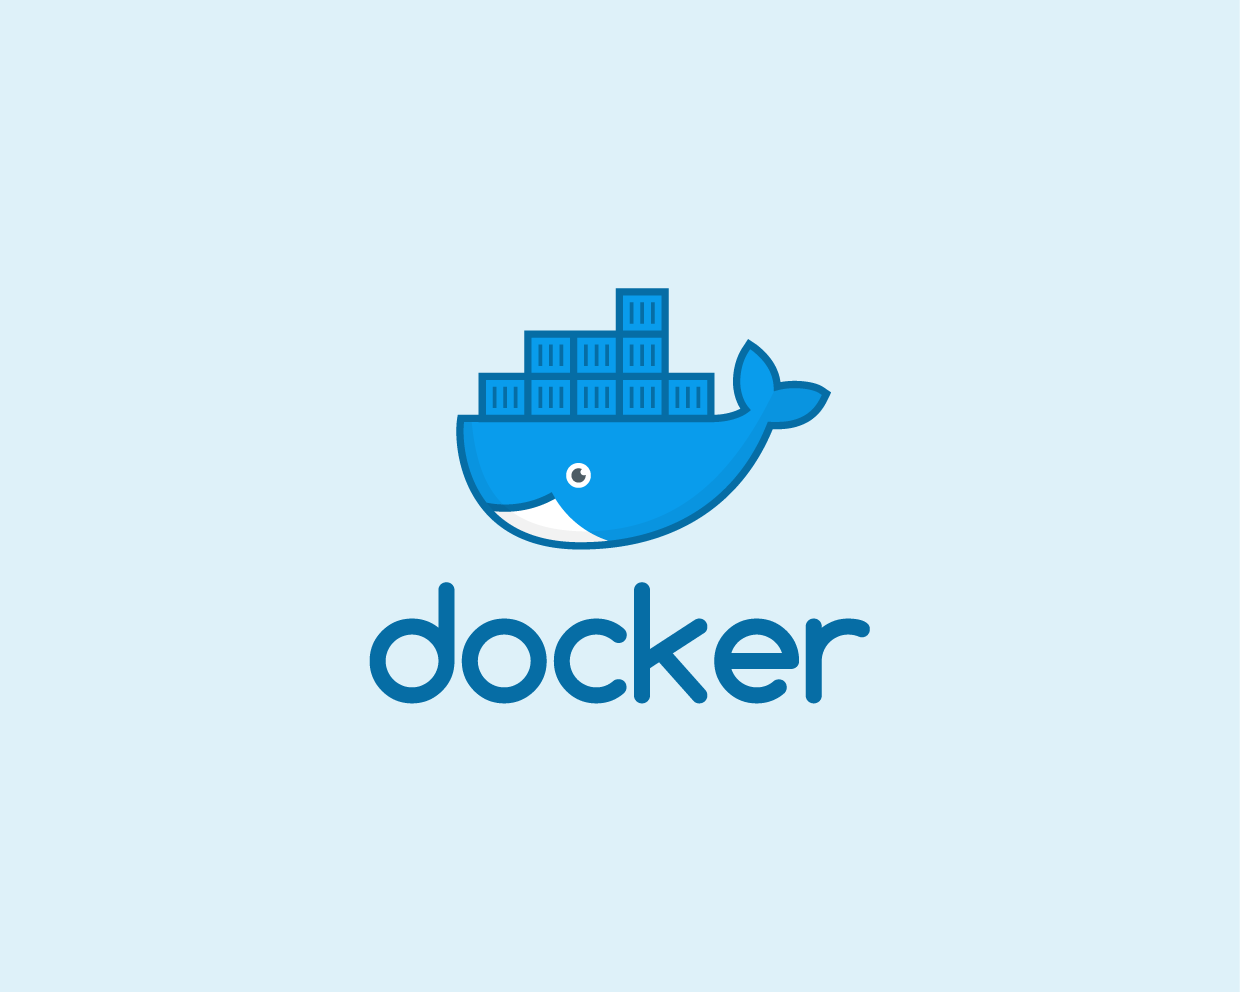 Orchestration With Docker-Swarm